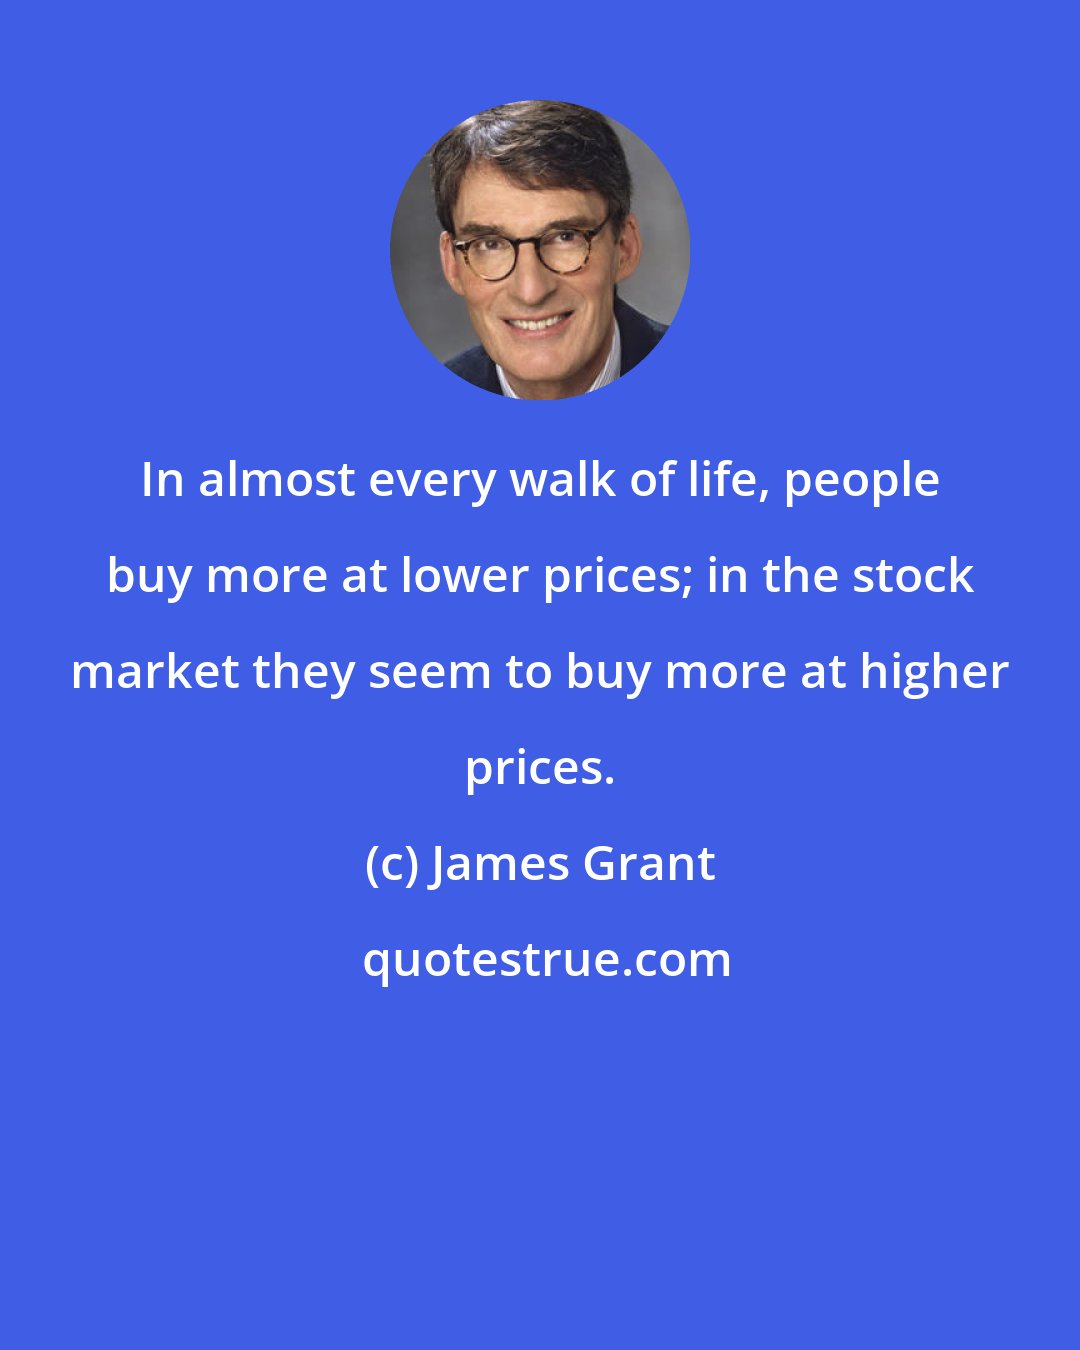 James Grant: In almost every walk of life, people buy more at lower prices; in the stock market they seem to buy more at higher prices.